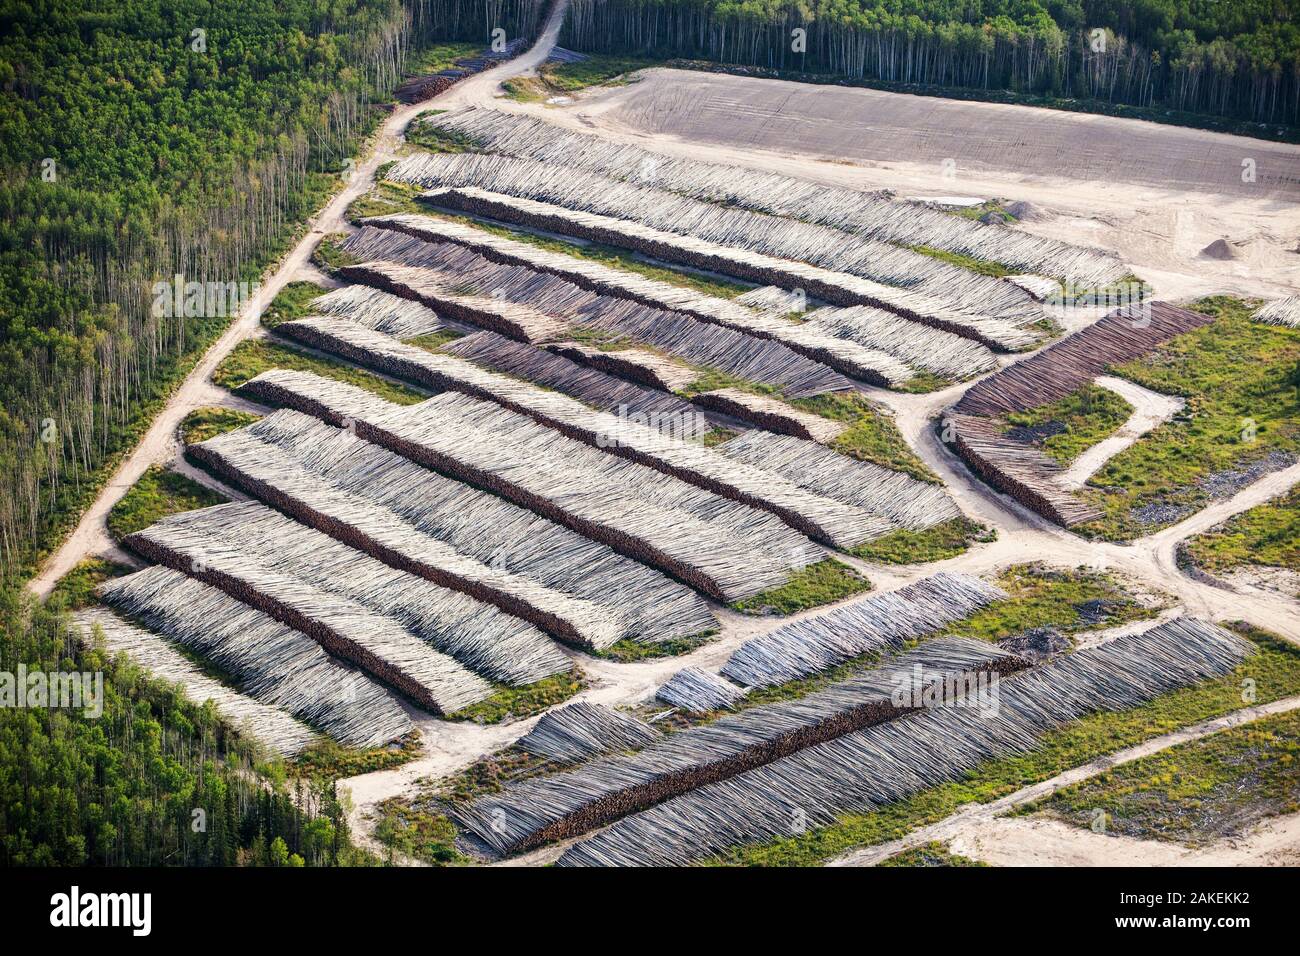 Boreal forest trees clear felled to make way for a new tar sands mine north of Fort McMurray, Alberta, Canada.  August 2012 Stock Photo